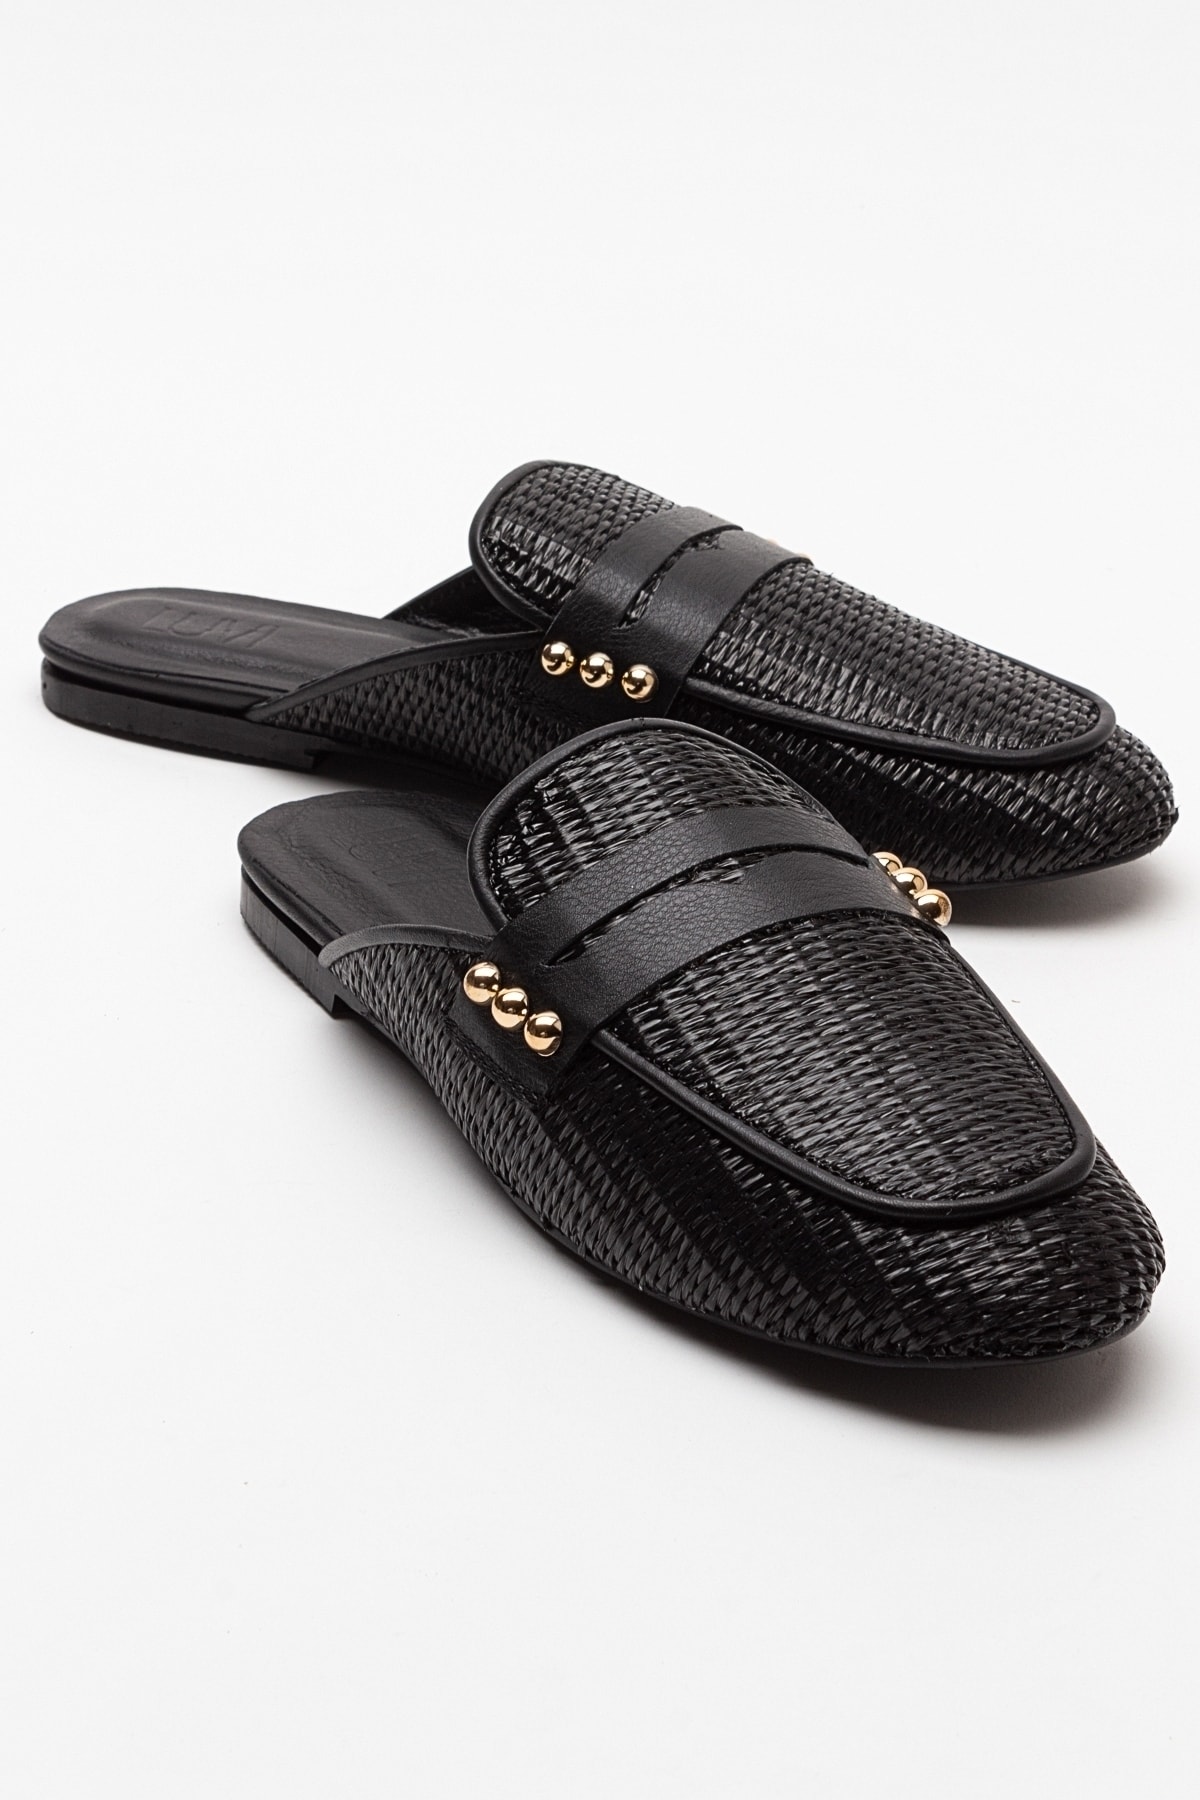 Levně LuviShoes 165 Women's Slippers From Genuine Leather, Black Wicker